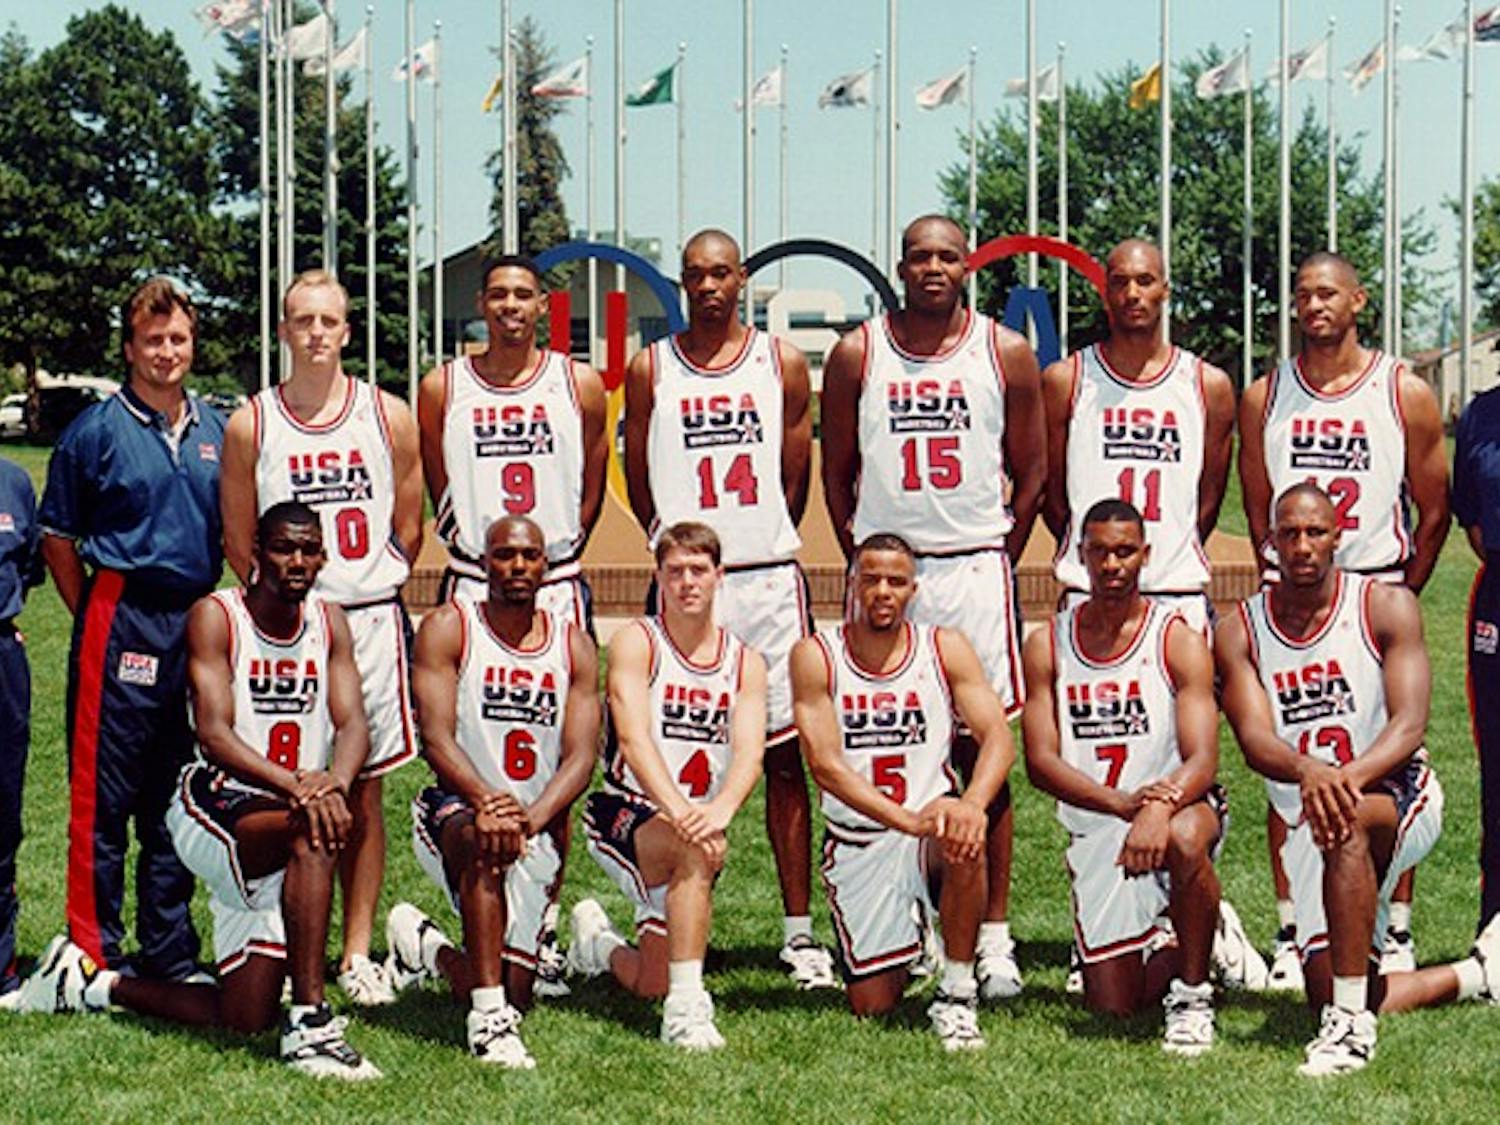 The U.S. men's basketball team had a 7-0 record and won gold at the 1993 World University Games in Buffalo.